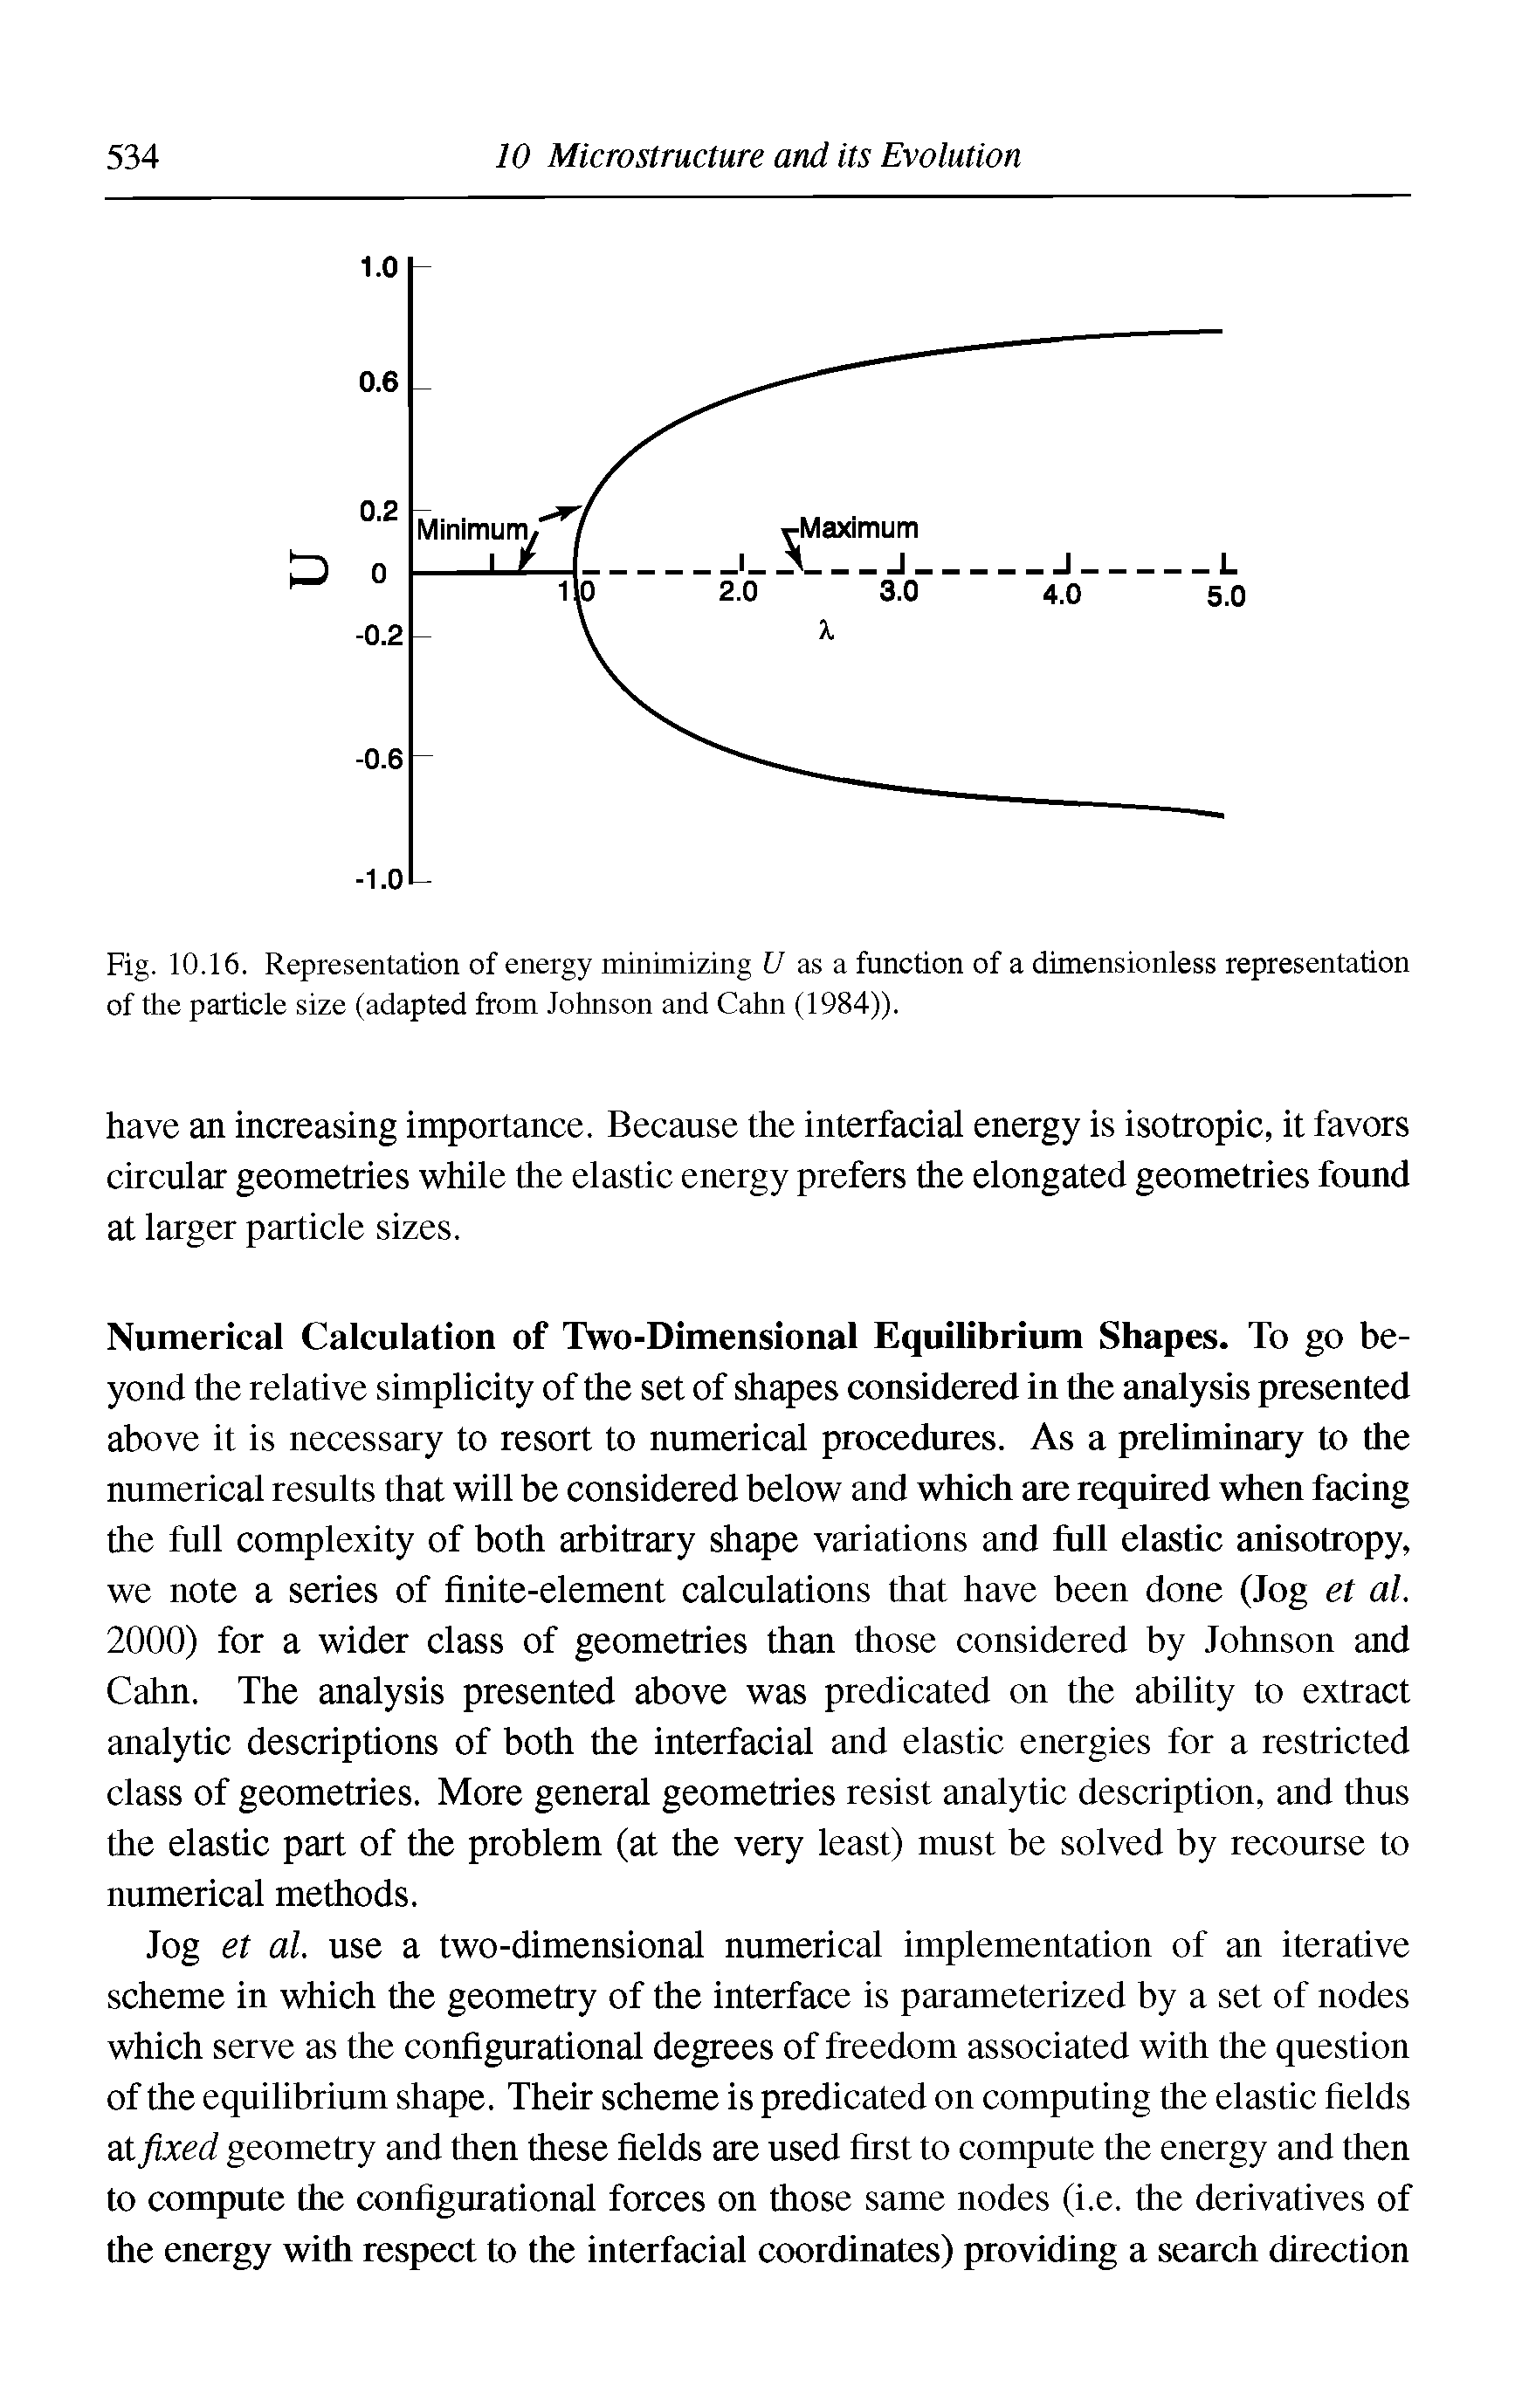 Fig. 10.16. Representation of energy minimizing 17 as a function of a dimensionless representation of the particle size (adapted from Johnson and Cahn (1984)).